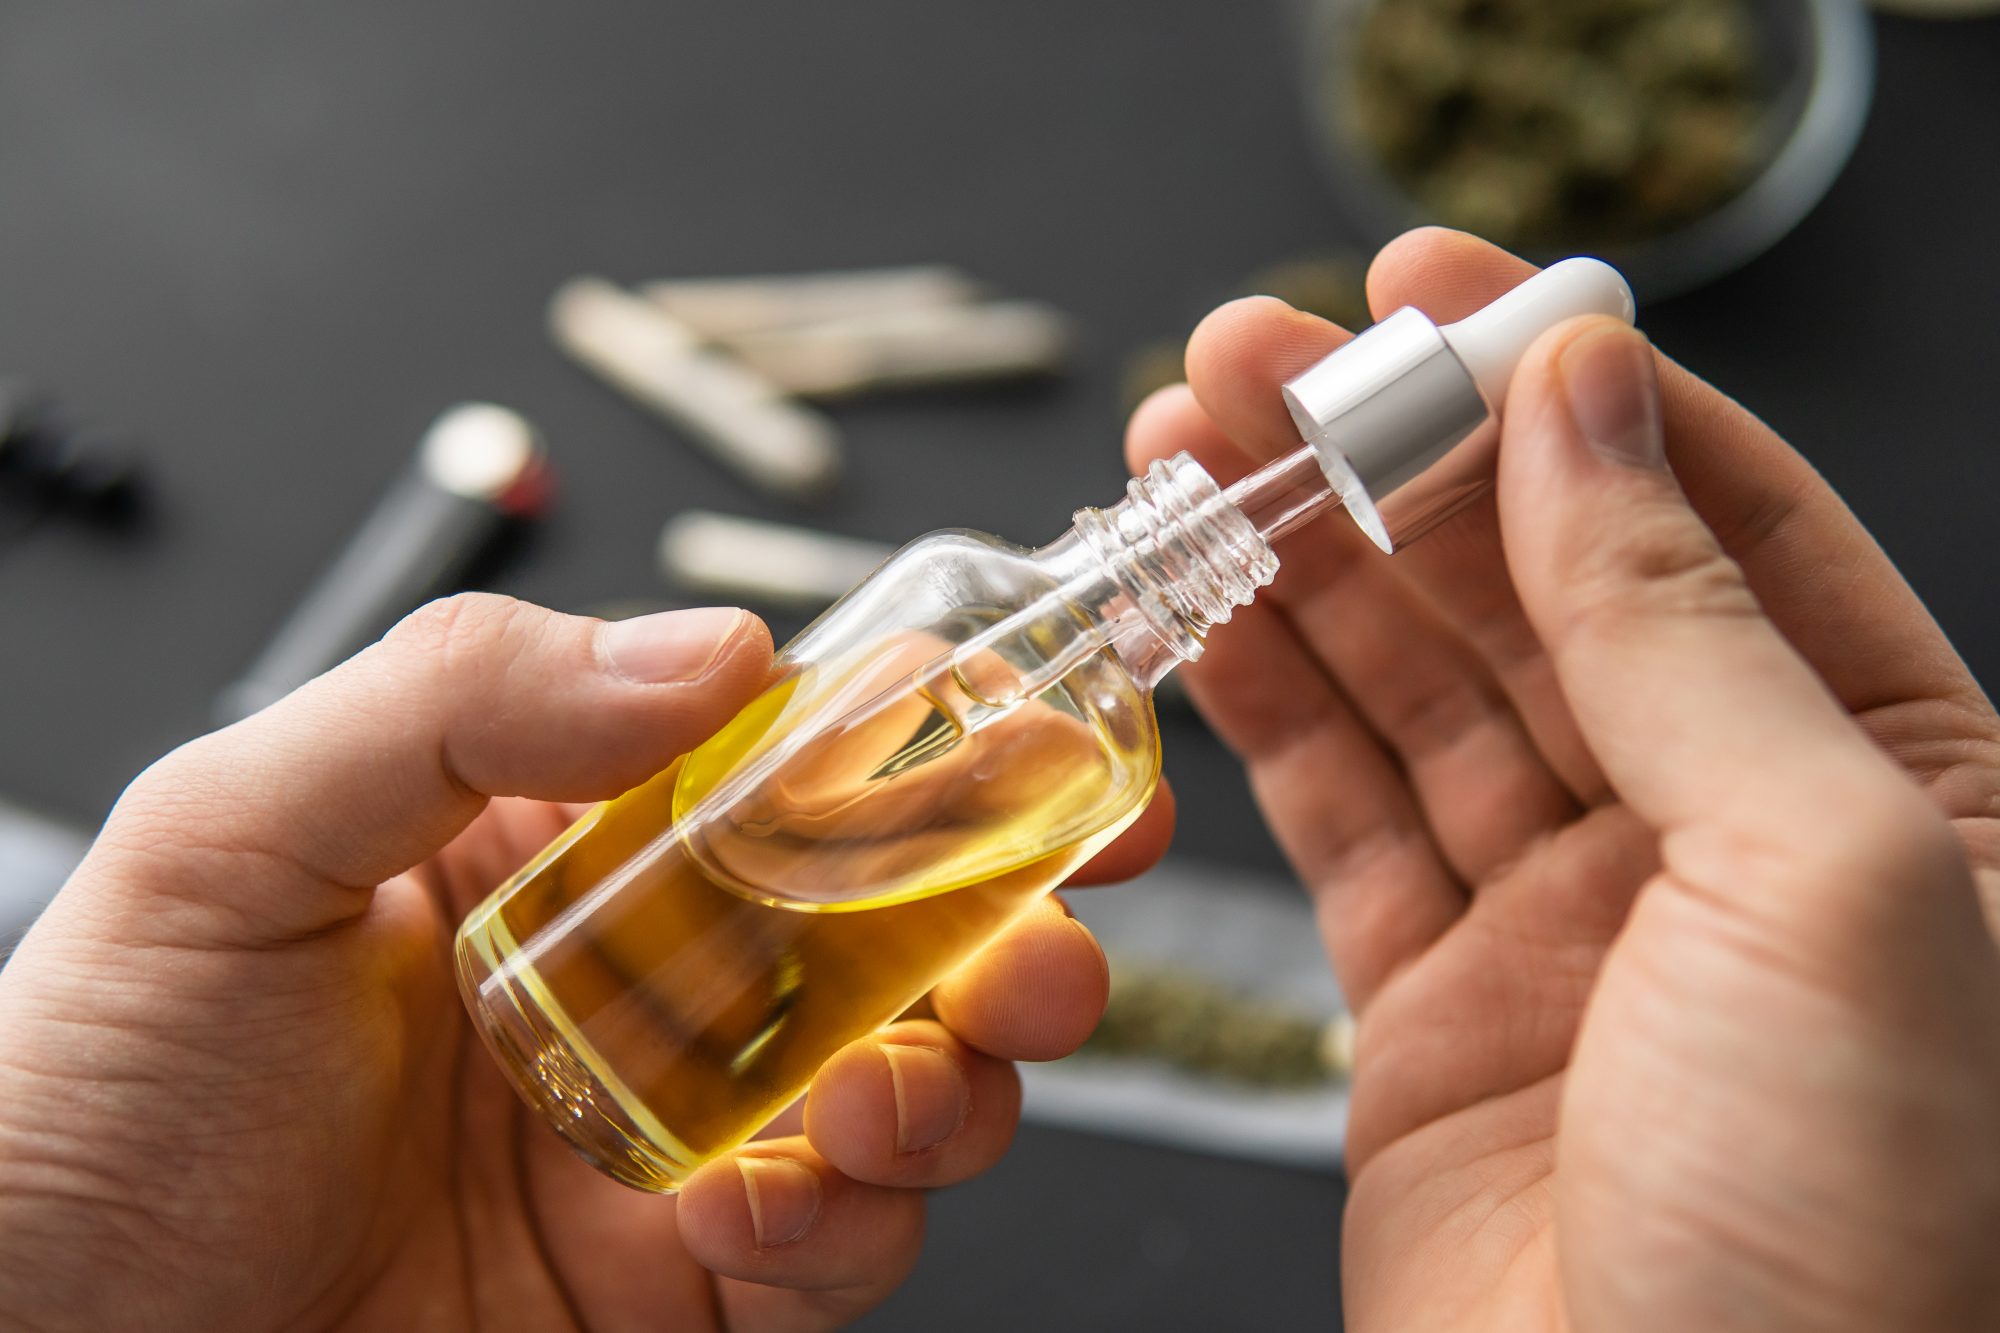 The health benefits and side-effects of the CBD oils